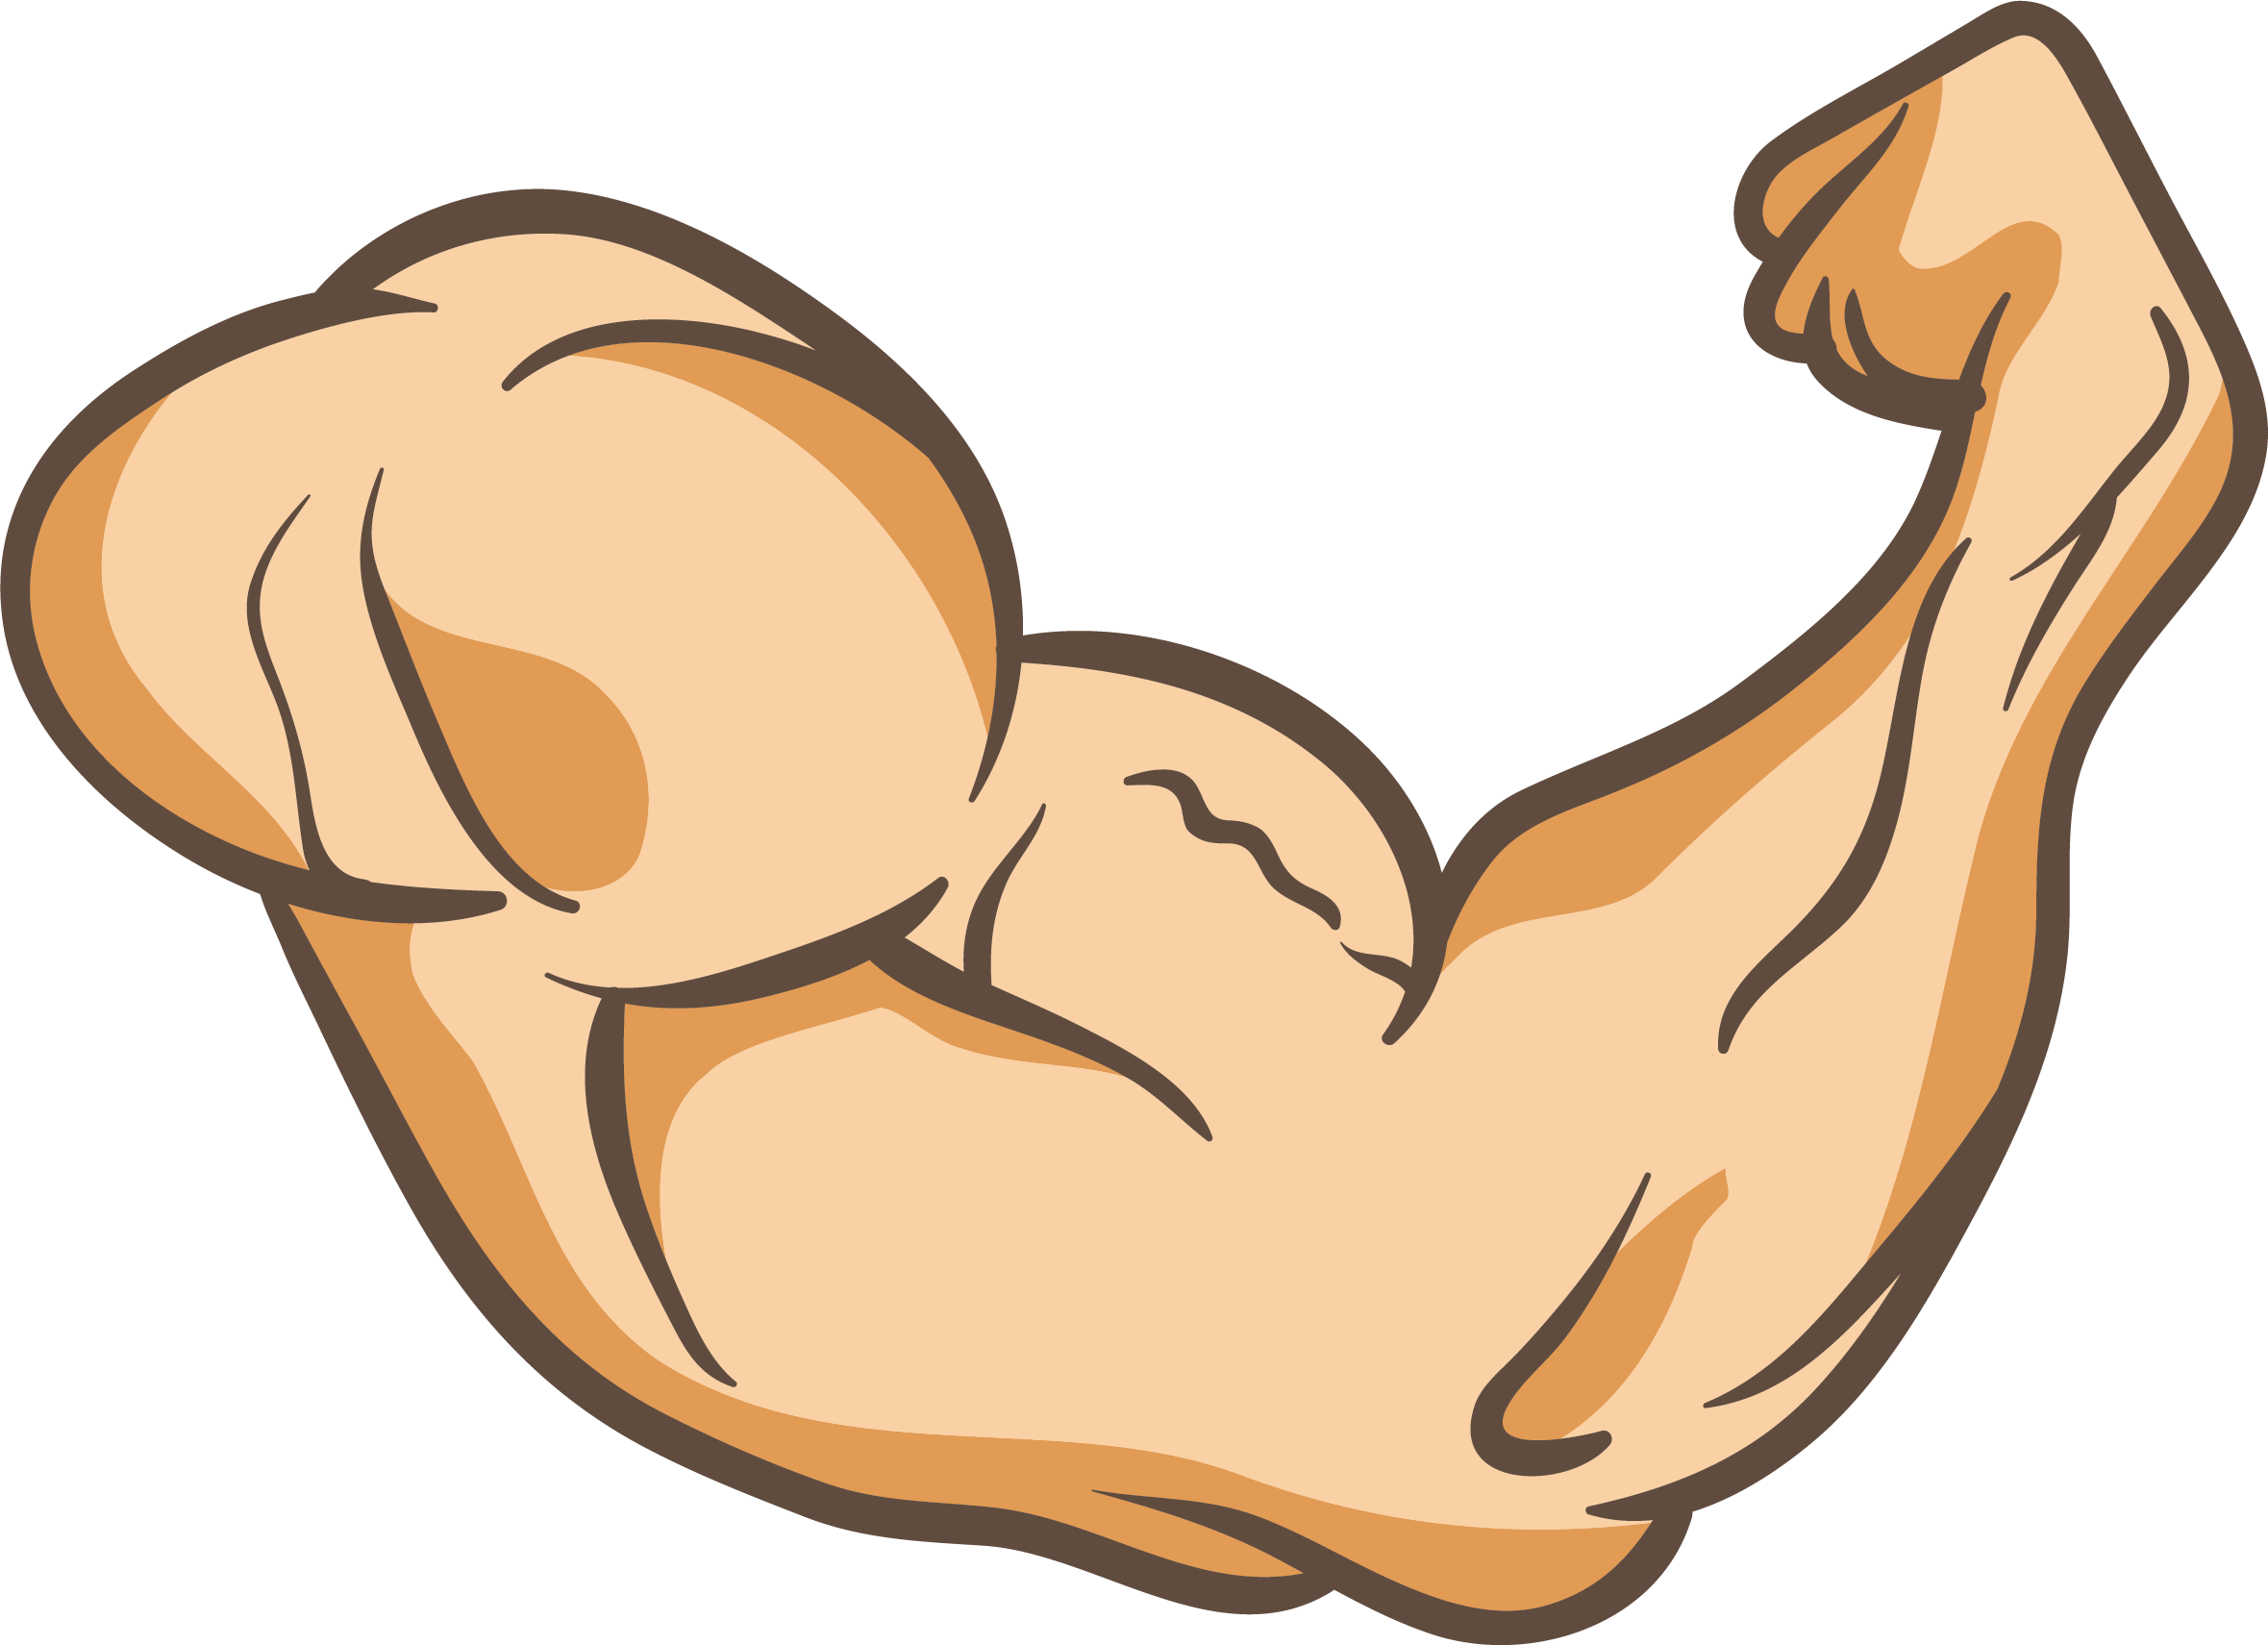 Arms and other clipart images on Cliparts pub ™